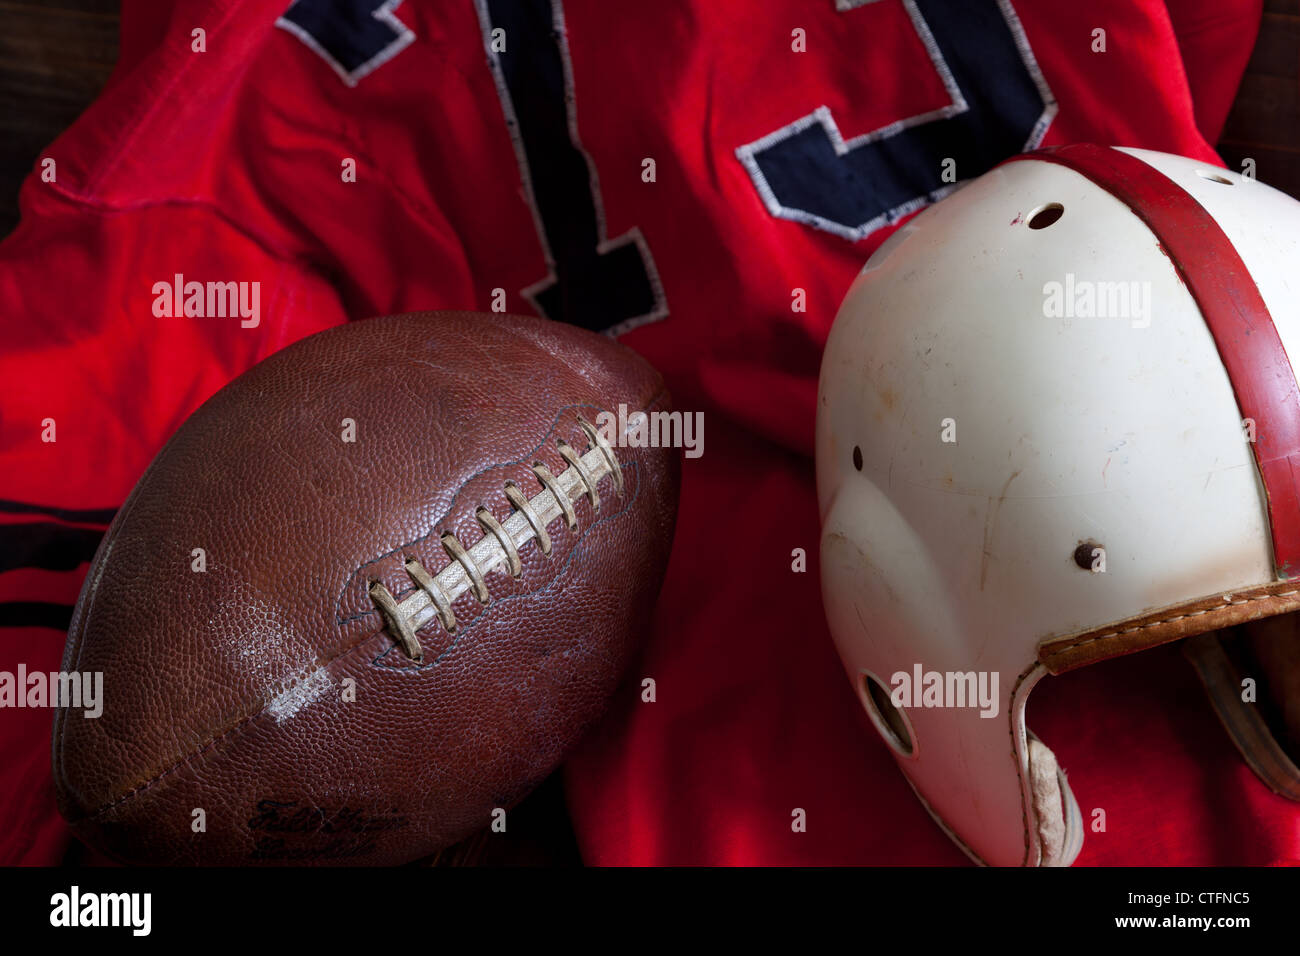 A group of vintage, antique American football equipment including a jersey, football and a helmet Stock Photo